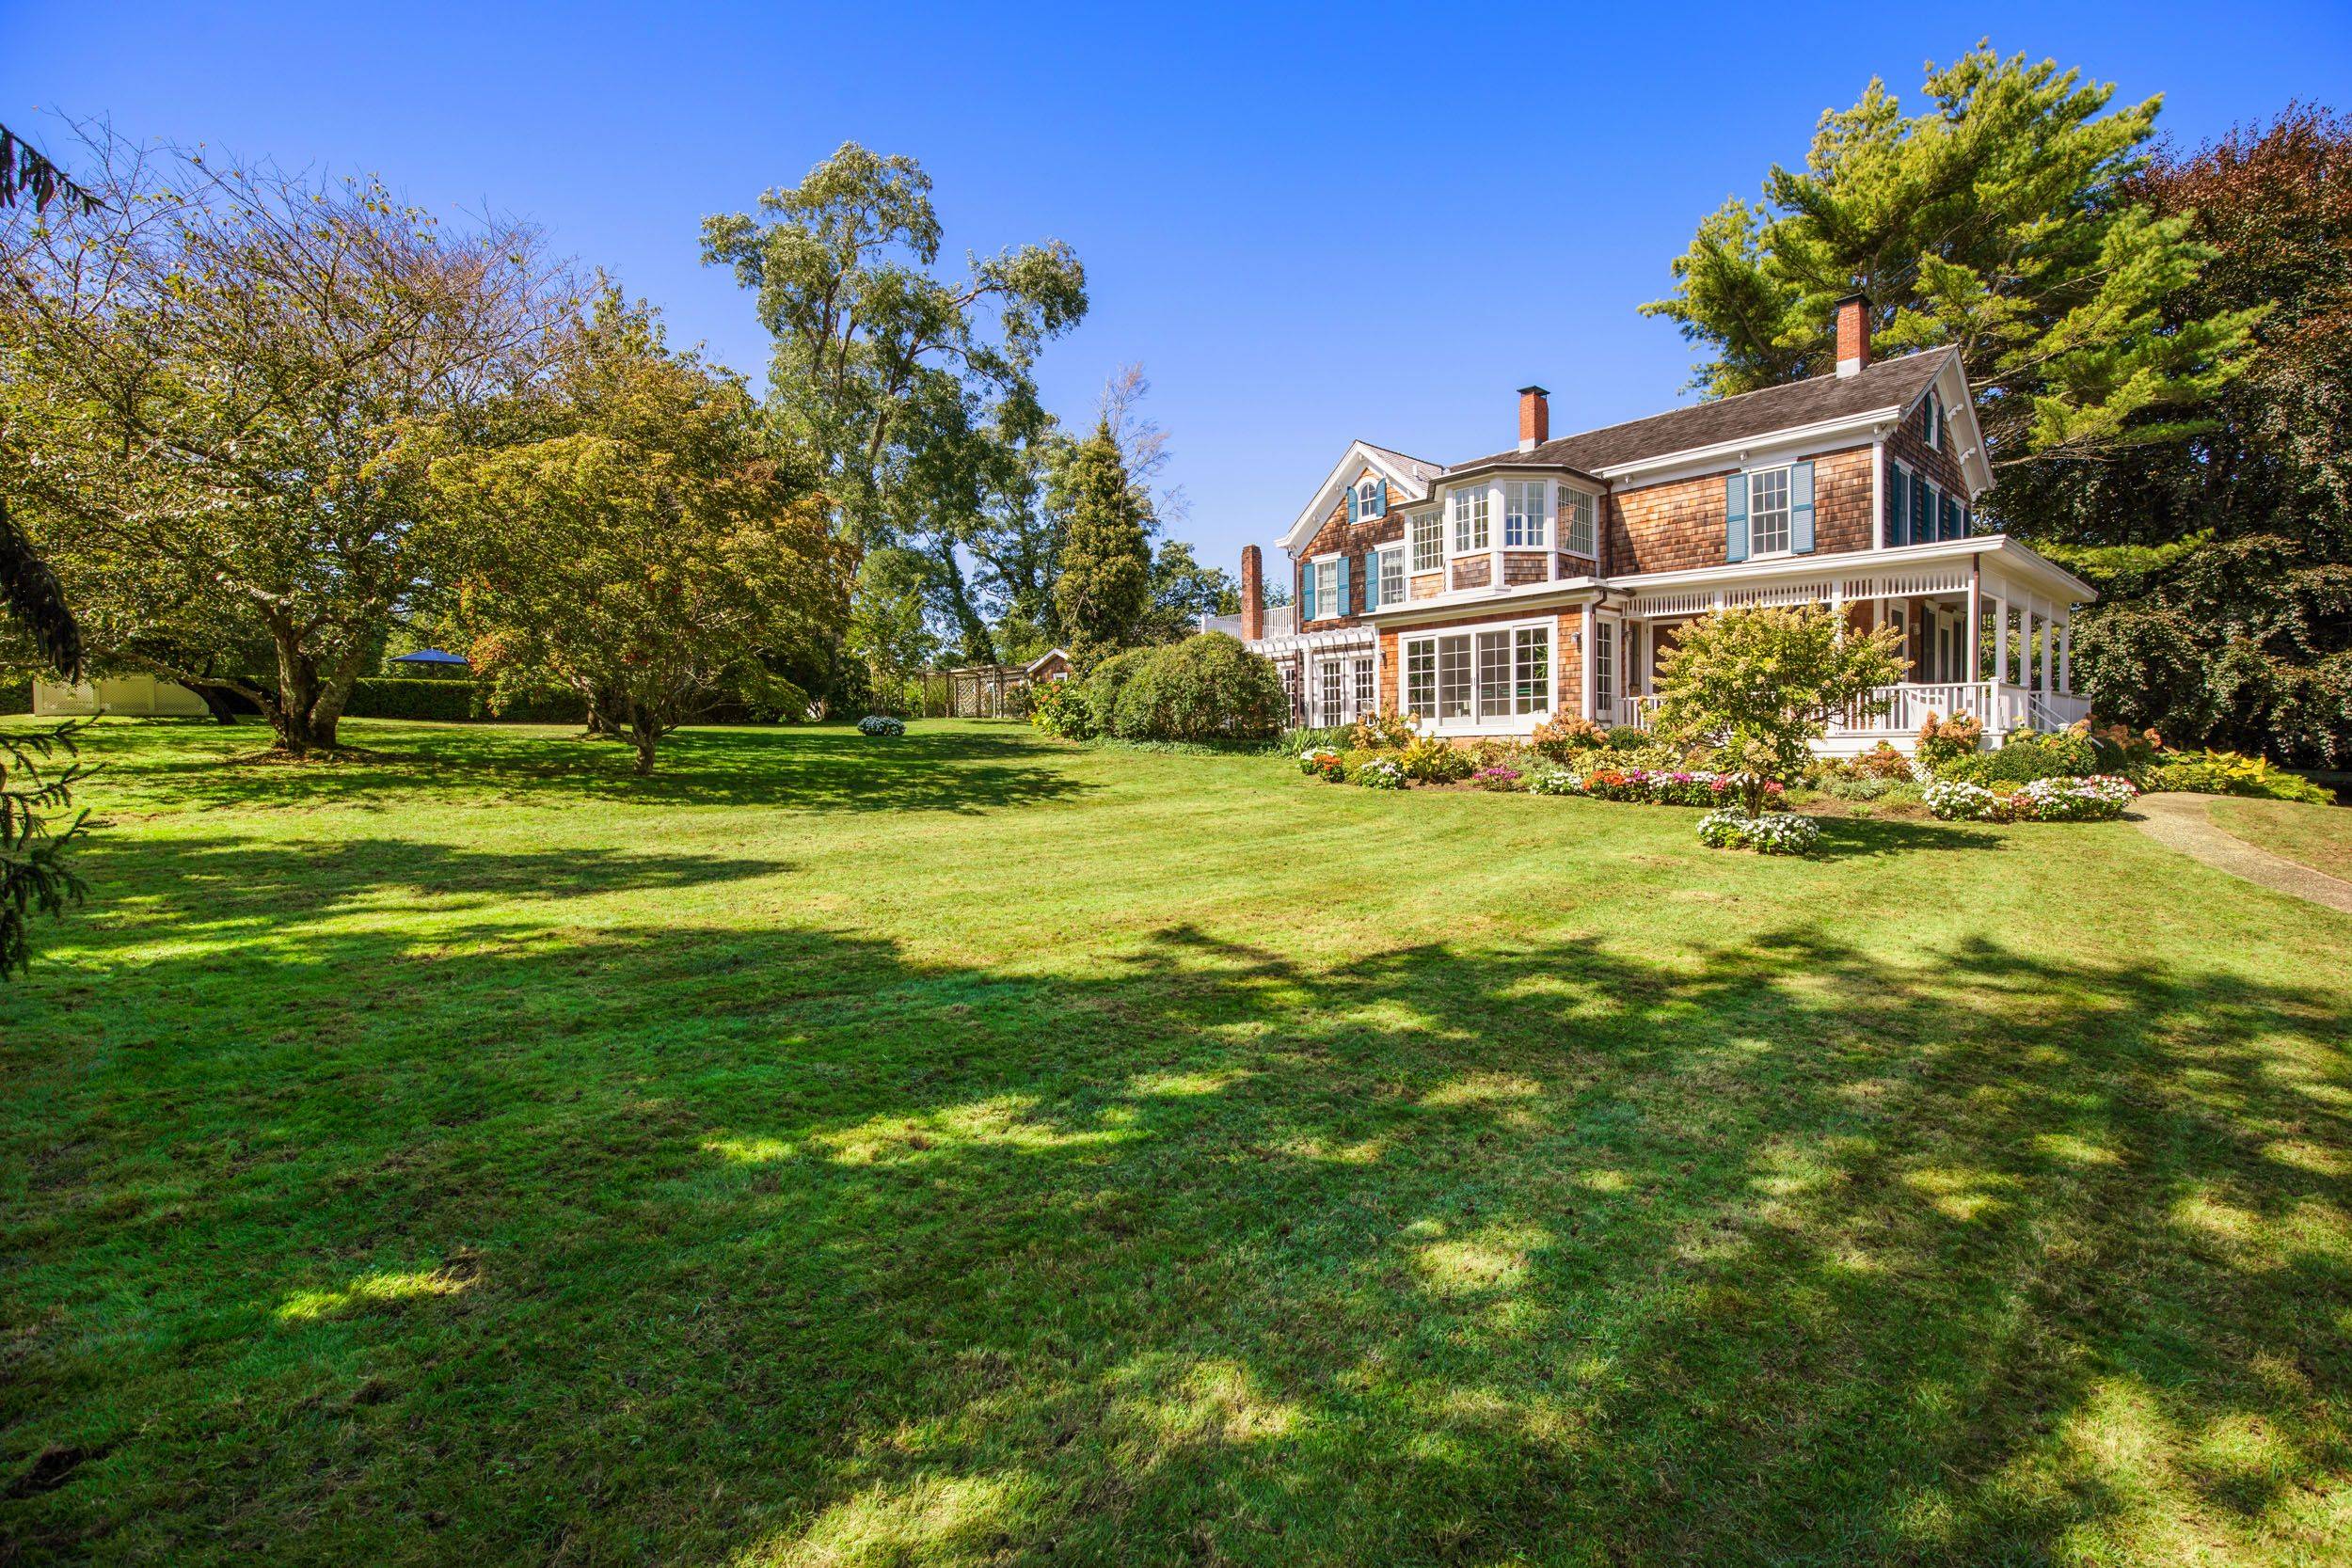 Refined Restoration in Southampton Village - 6 Bed With Pool